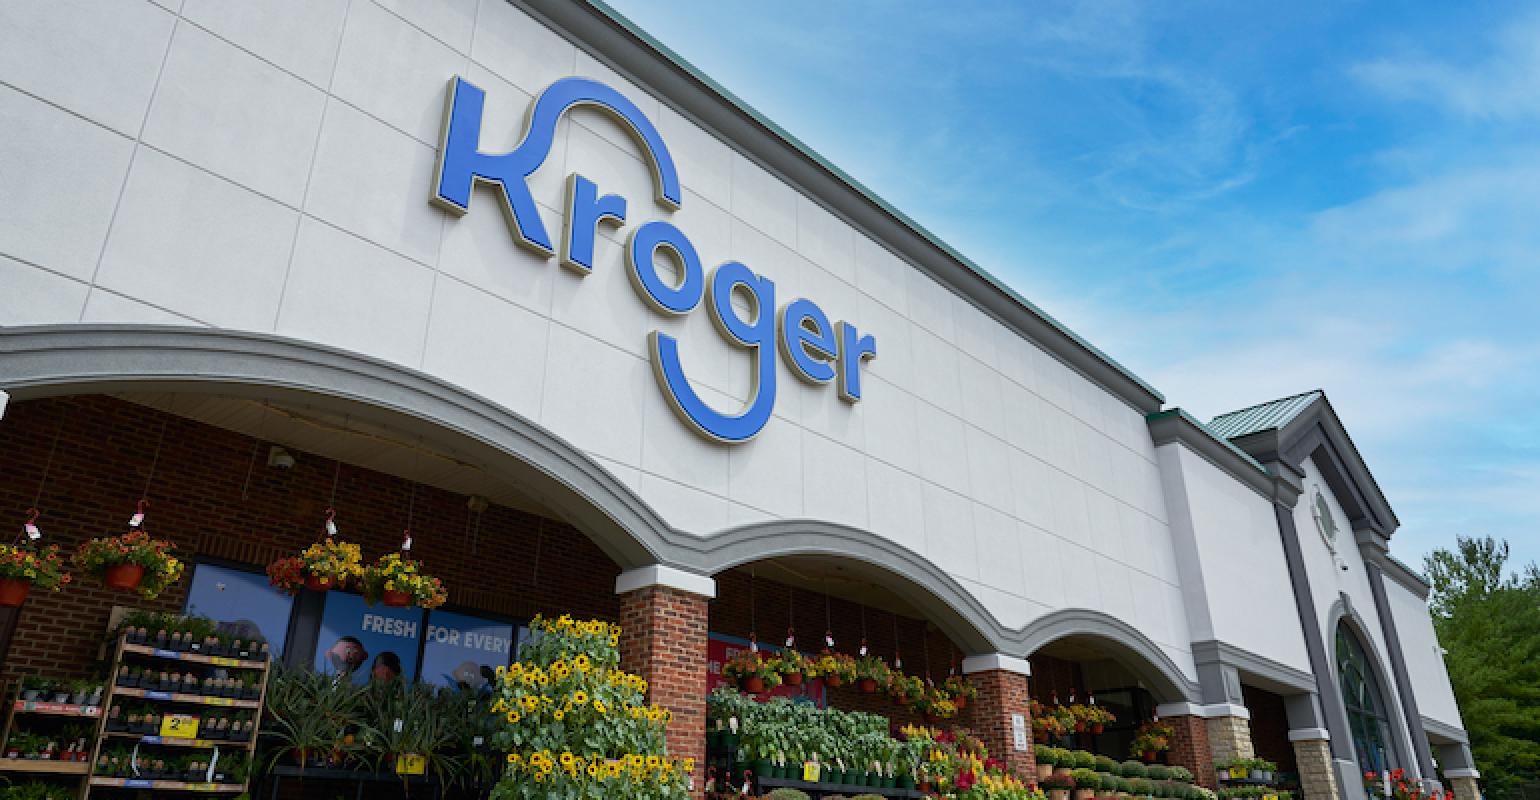 Join Our Team at Kroger: Exciting Career Opportunities Await You!